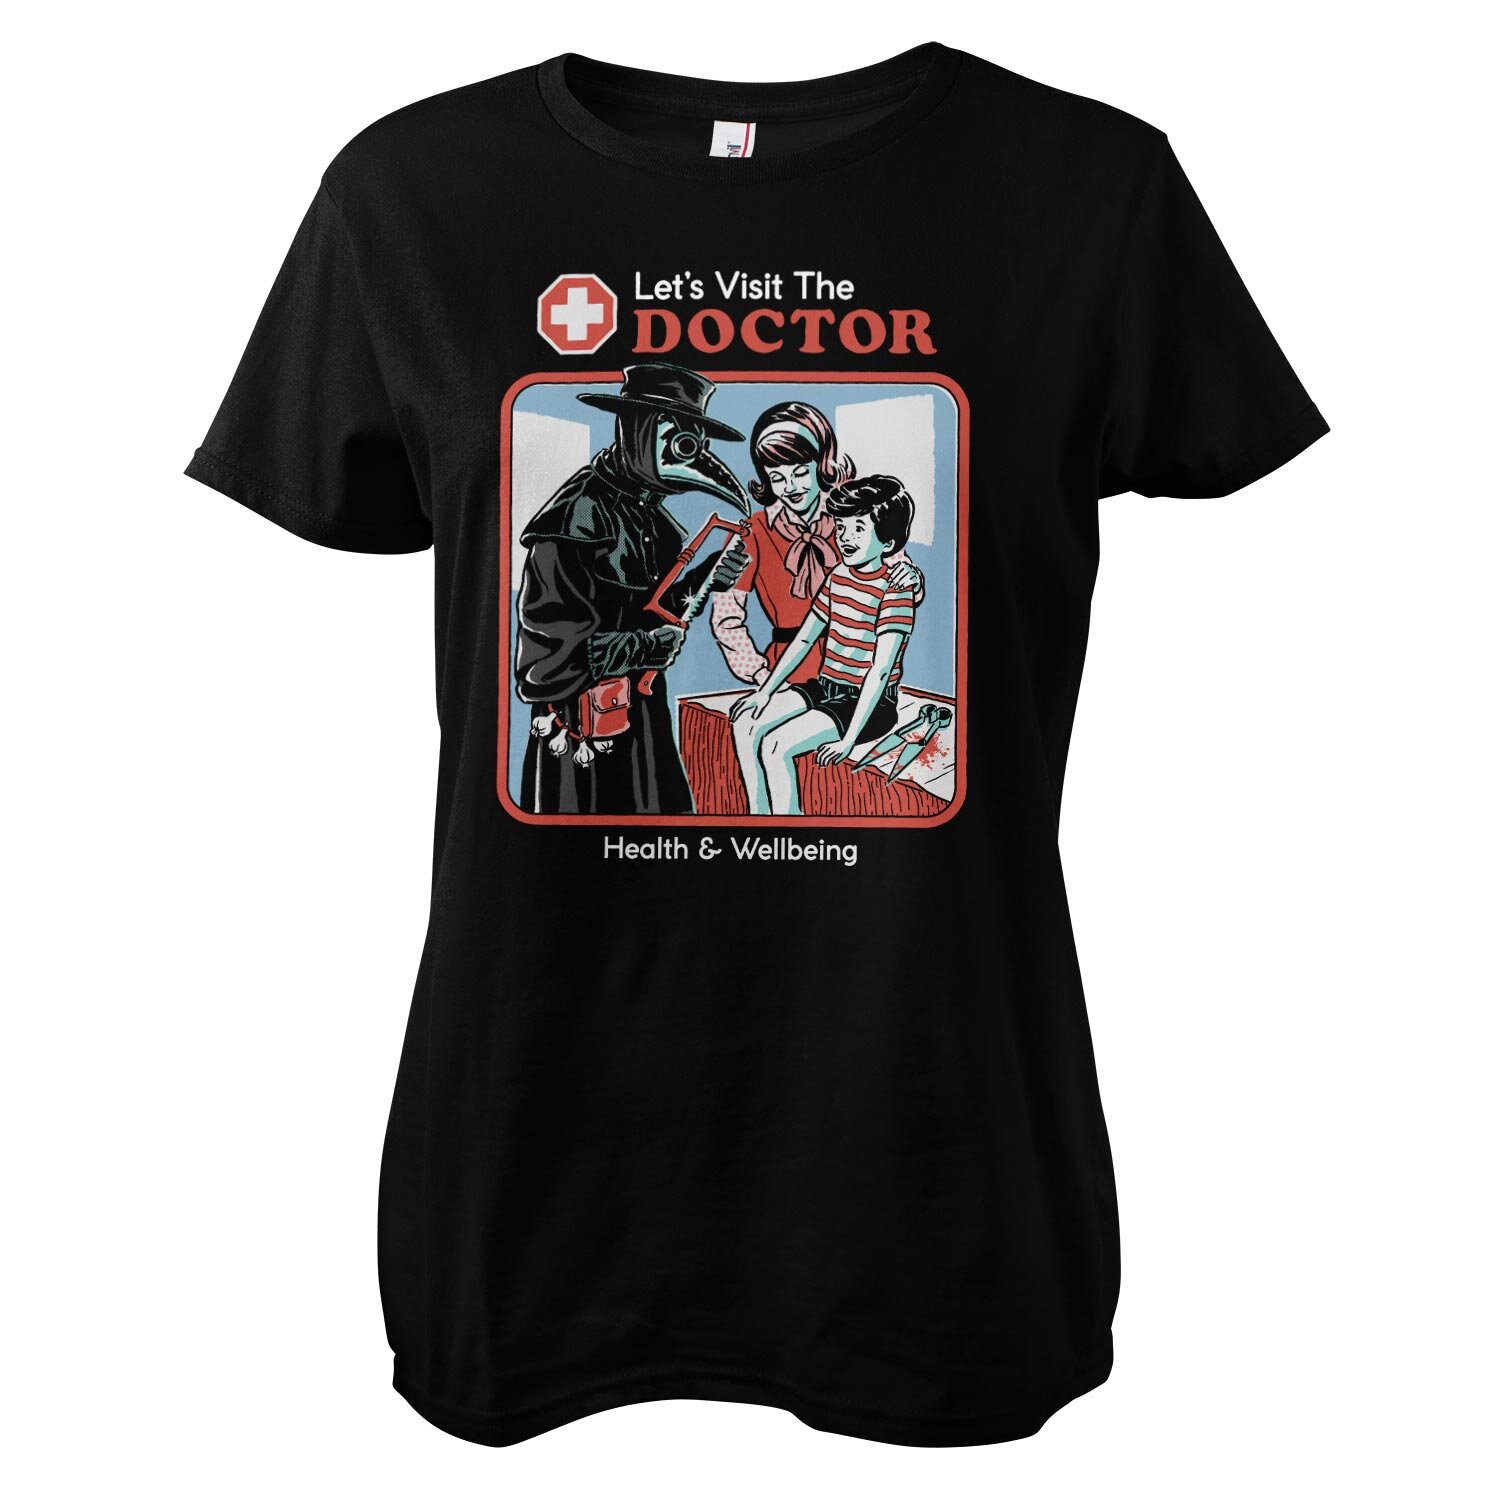 Let's Visit The Doctor Girly Tee